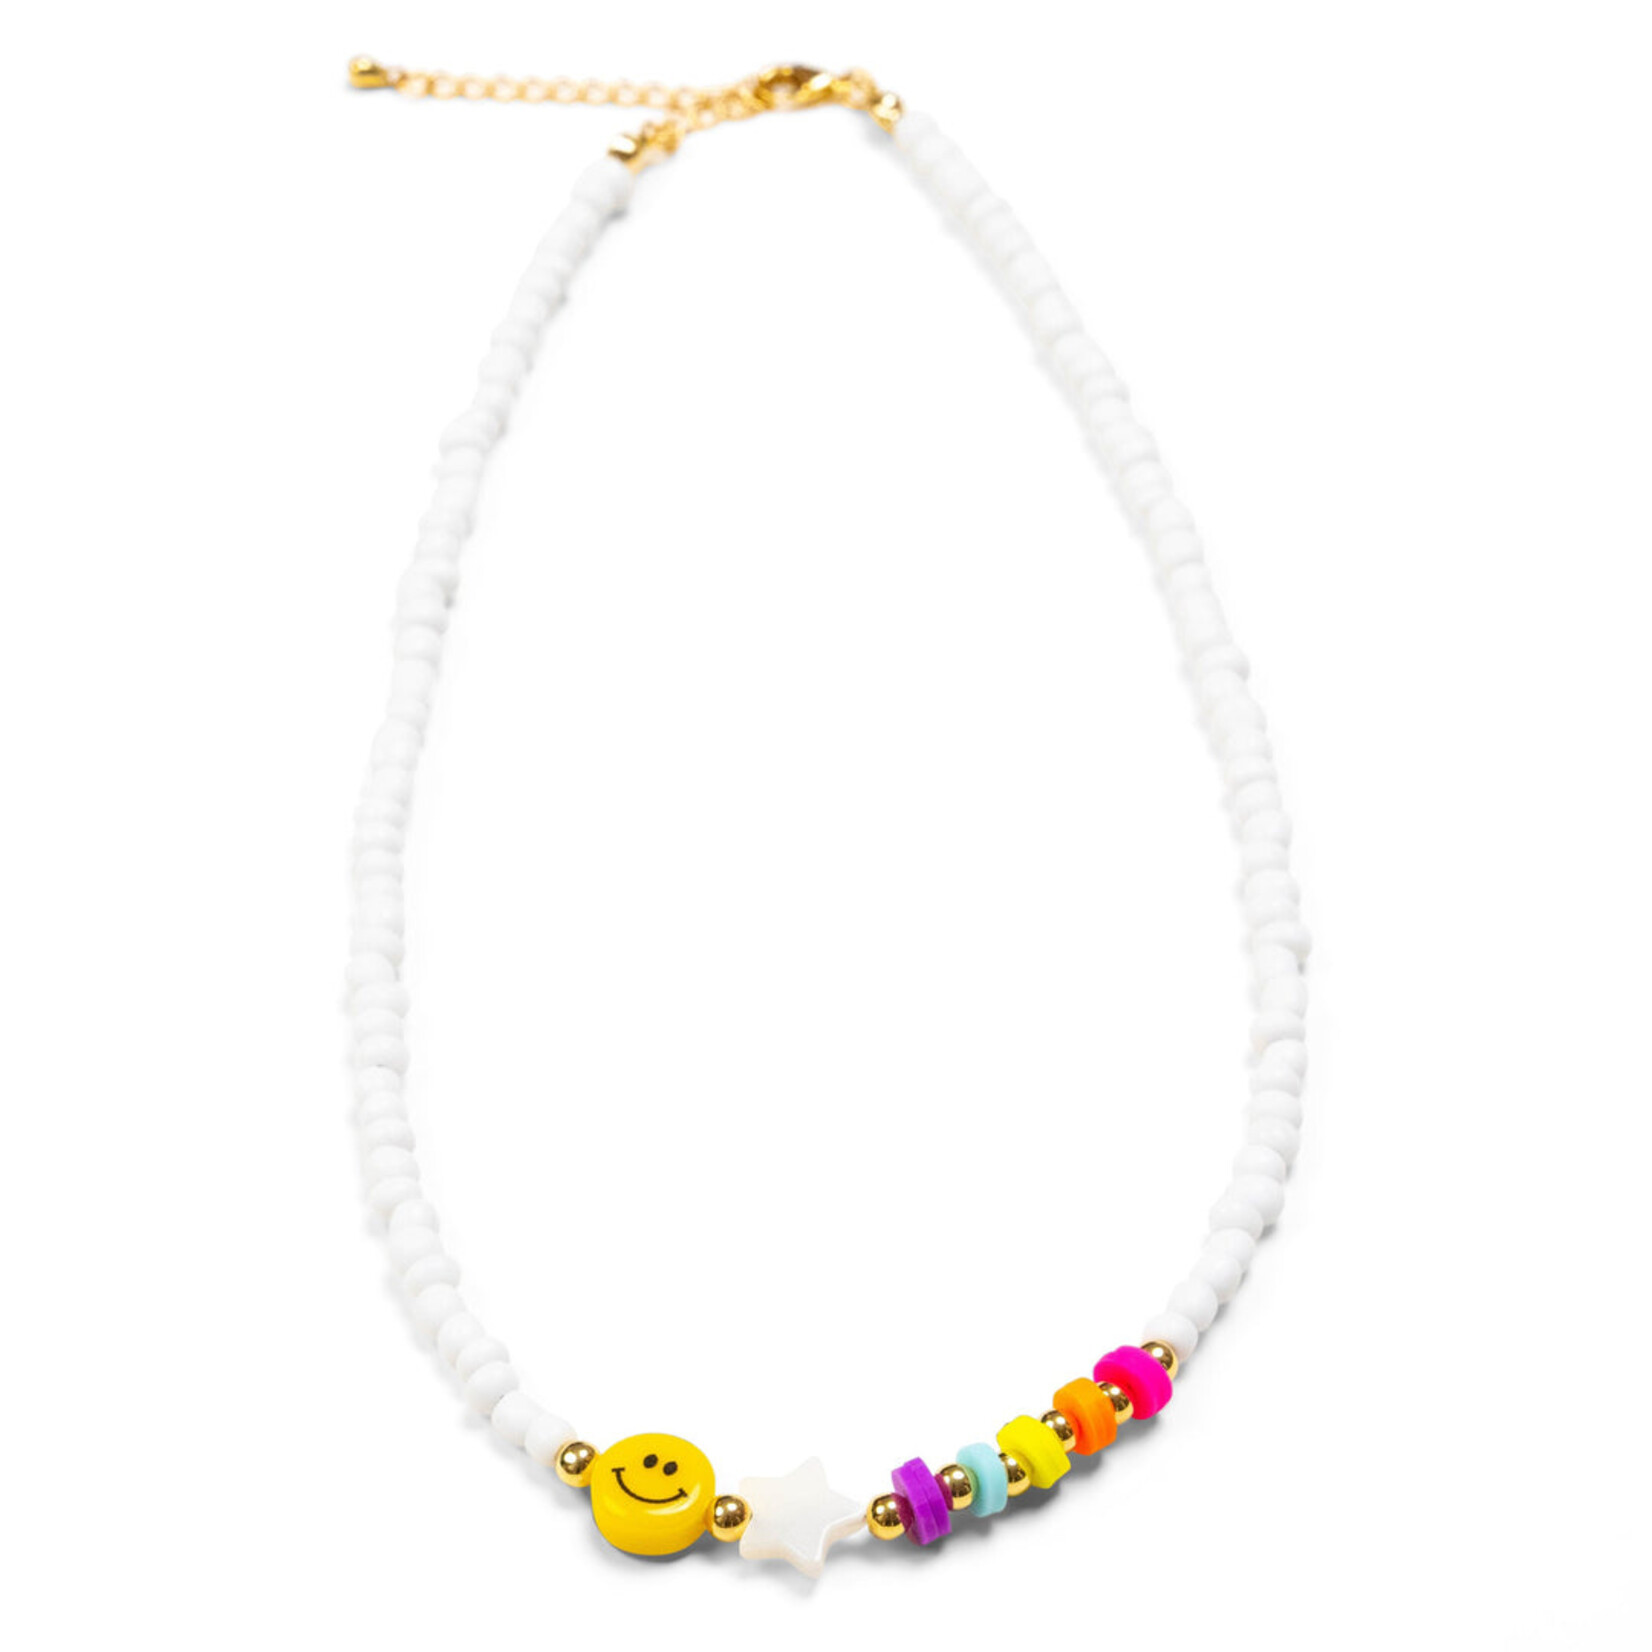 Malibu Sugar White Necklace with Rainbow & Smiley Face Bead Accents